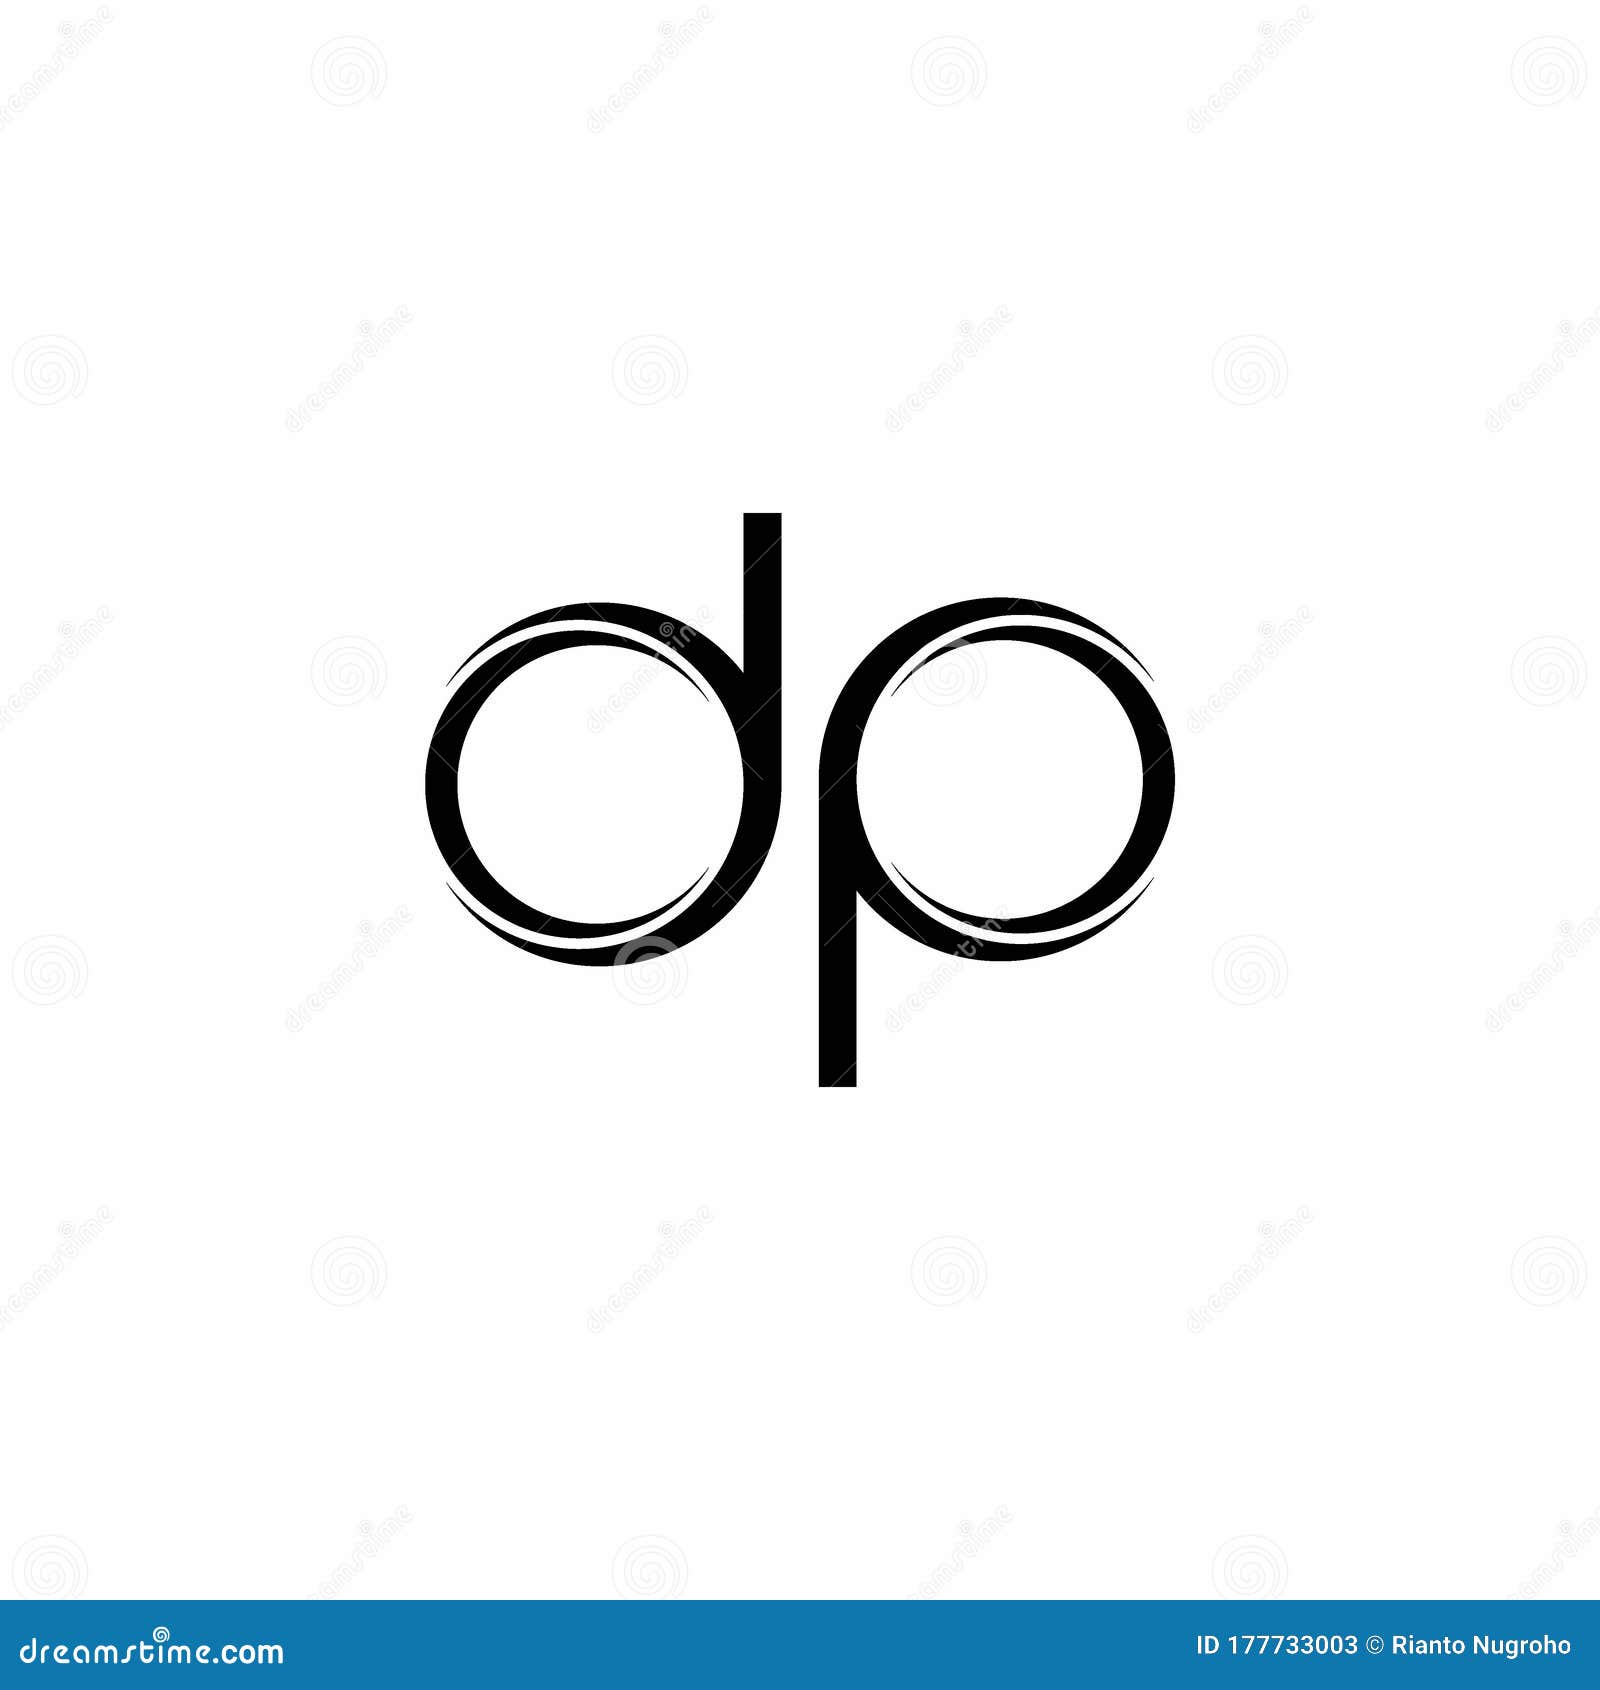 Dp Logo Vector Images (over 3,100)